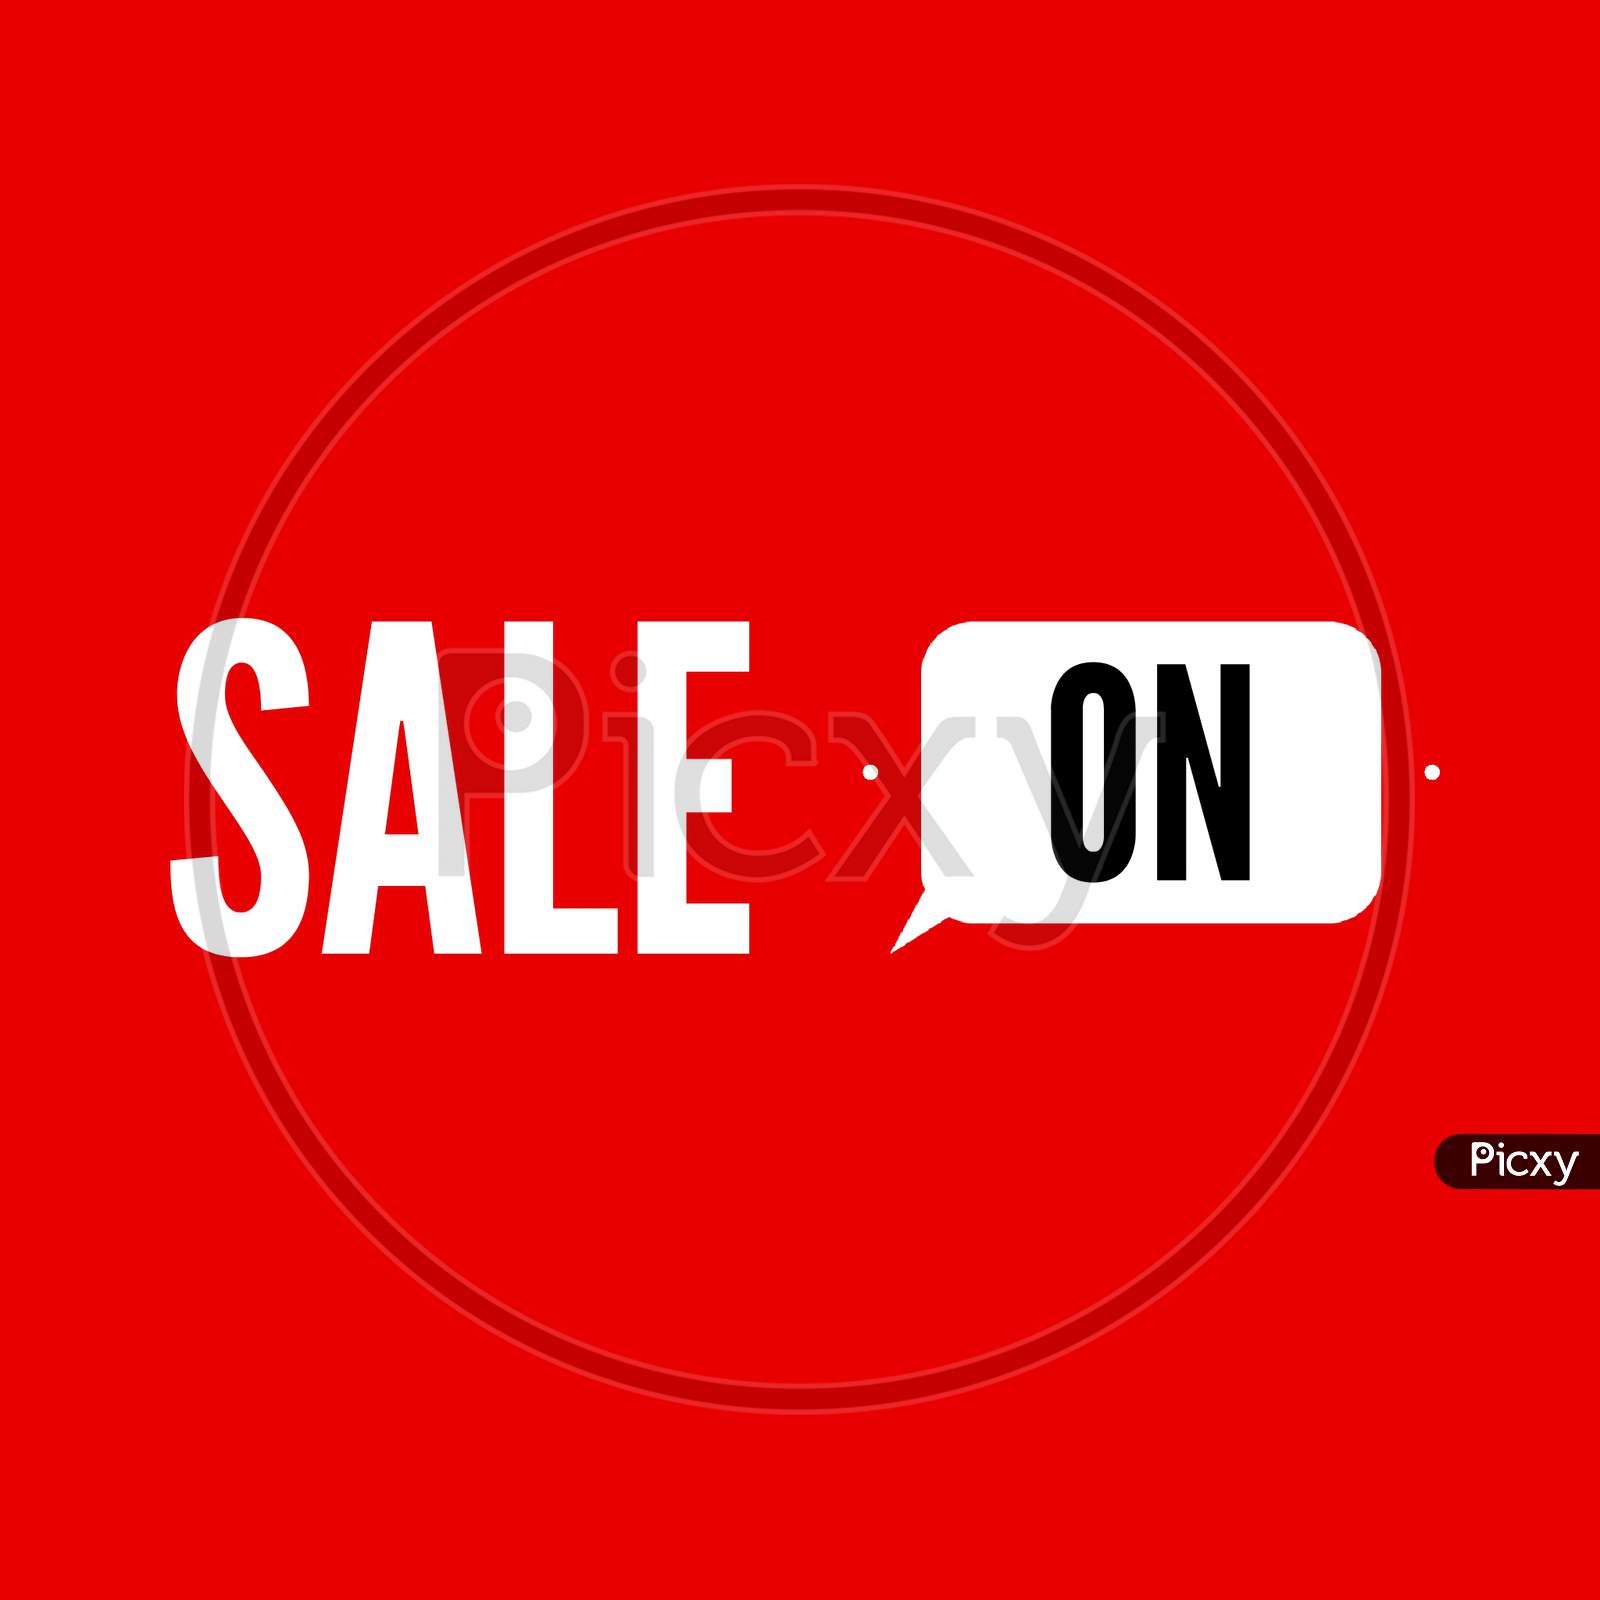 Image With A Text "Sale On" On Red Background.